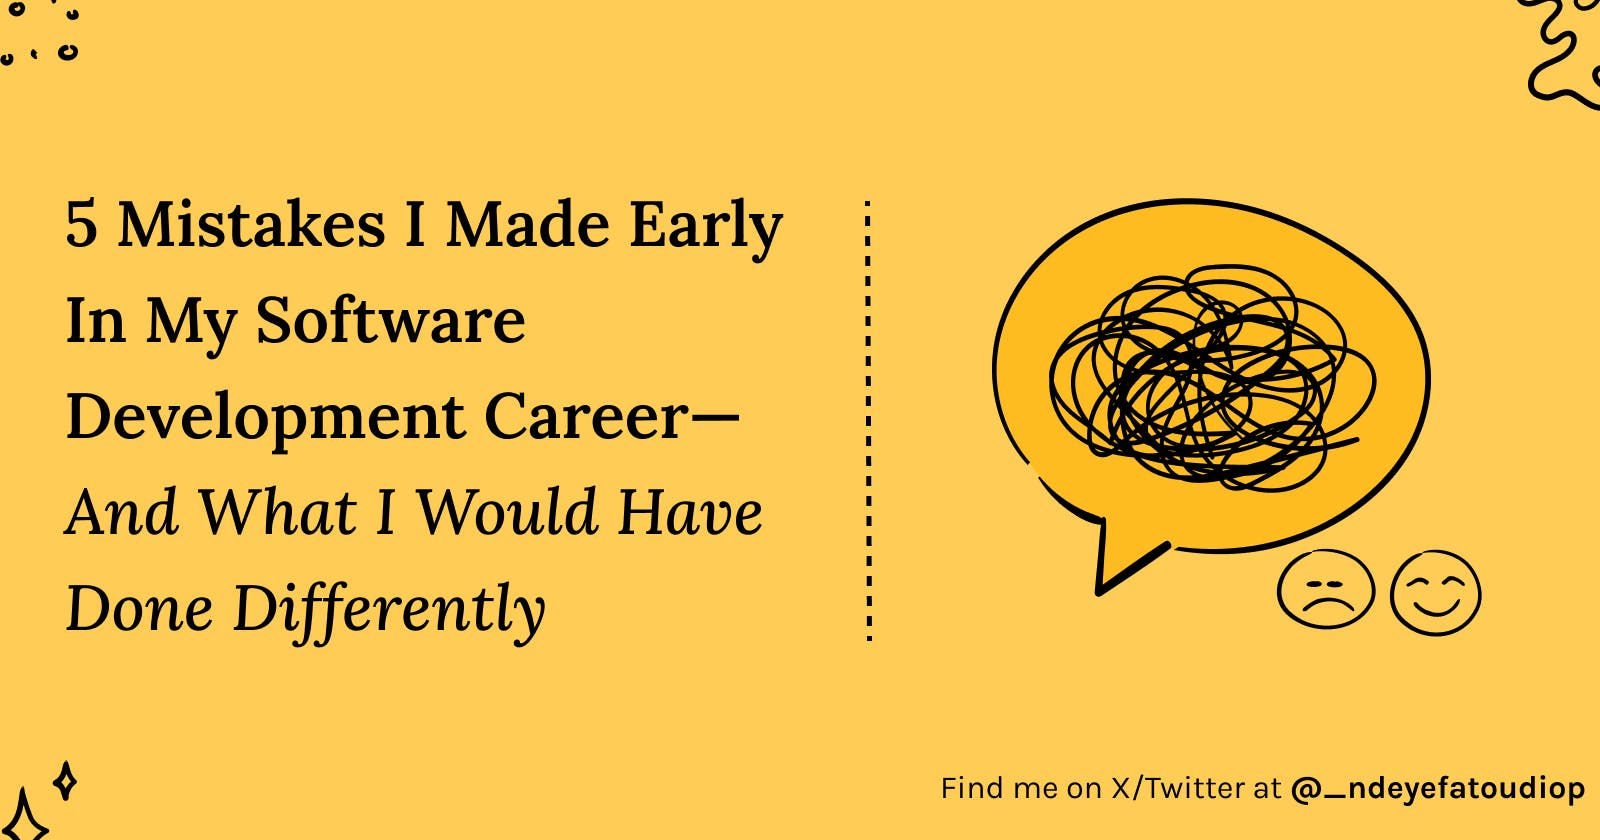 5 Mistakes I Made Early In My Software Development Career—And What I Would Have Done Differently